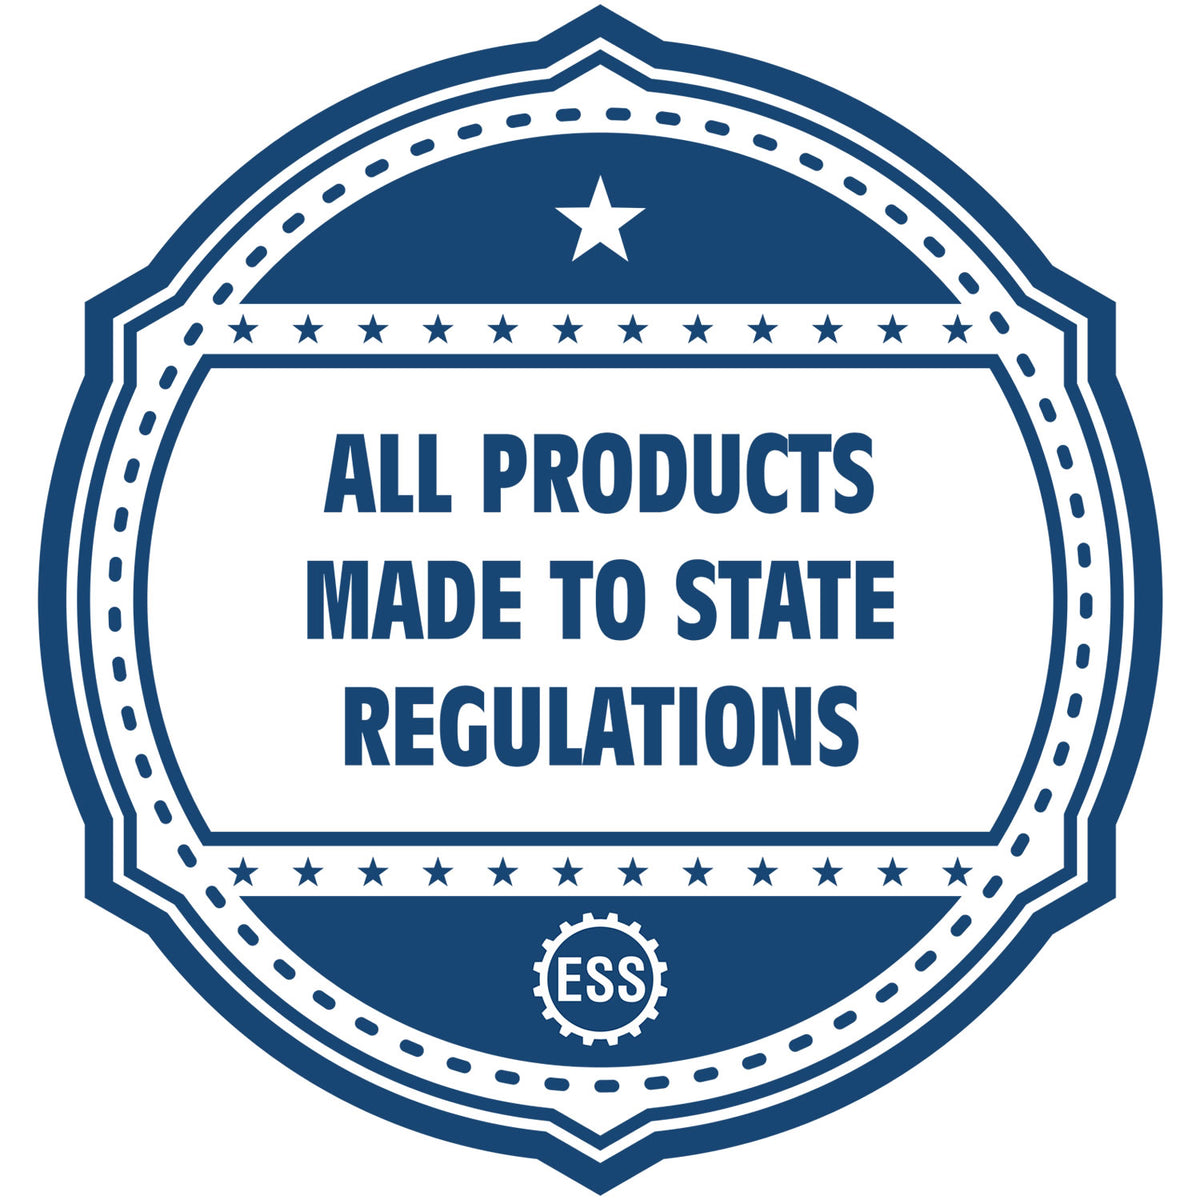 An icon or badge element for the Self-Inking State Seal New York Notary Stamp showing that this product is made in compliance with state regulations.